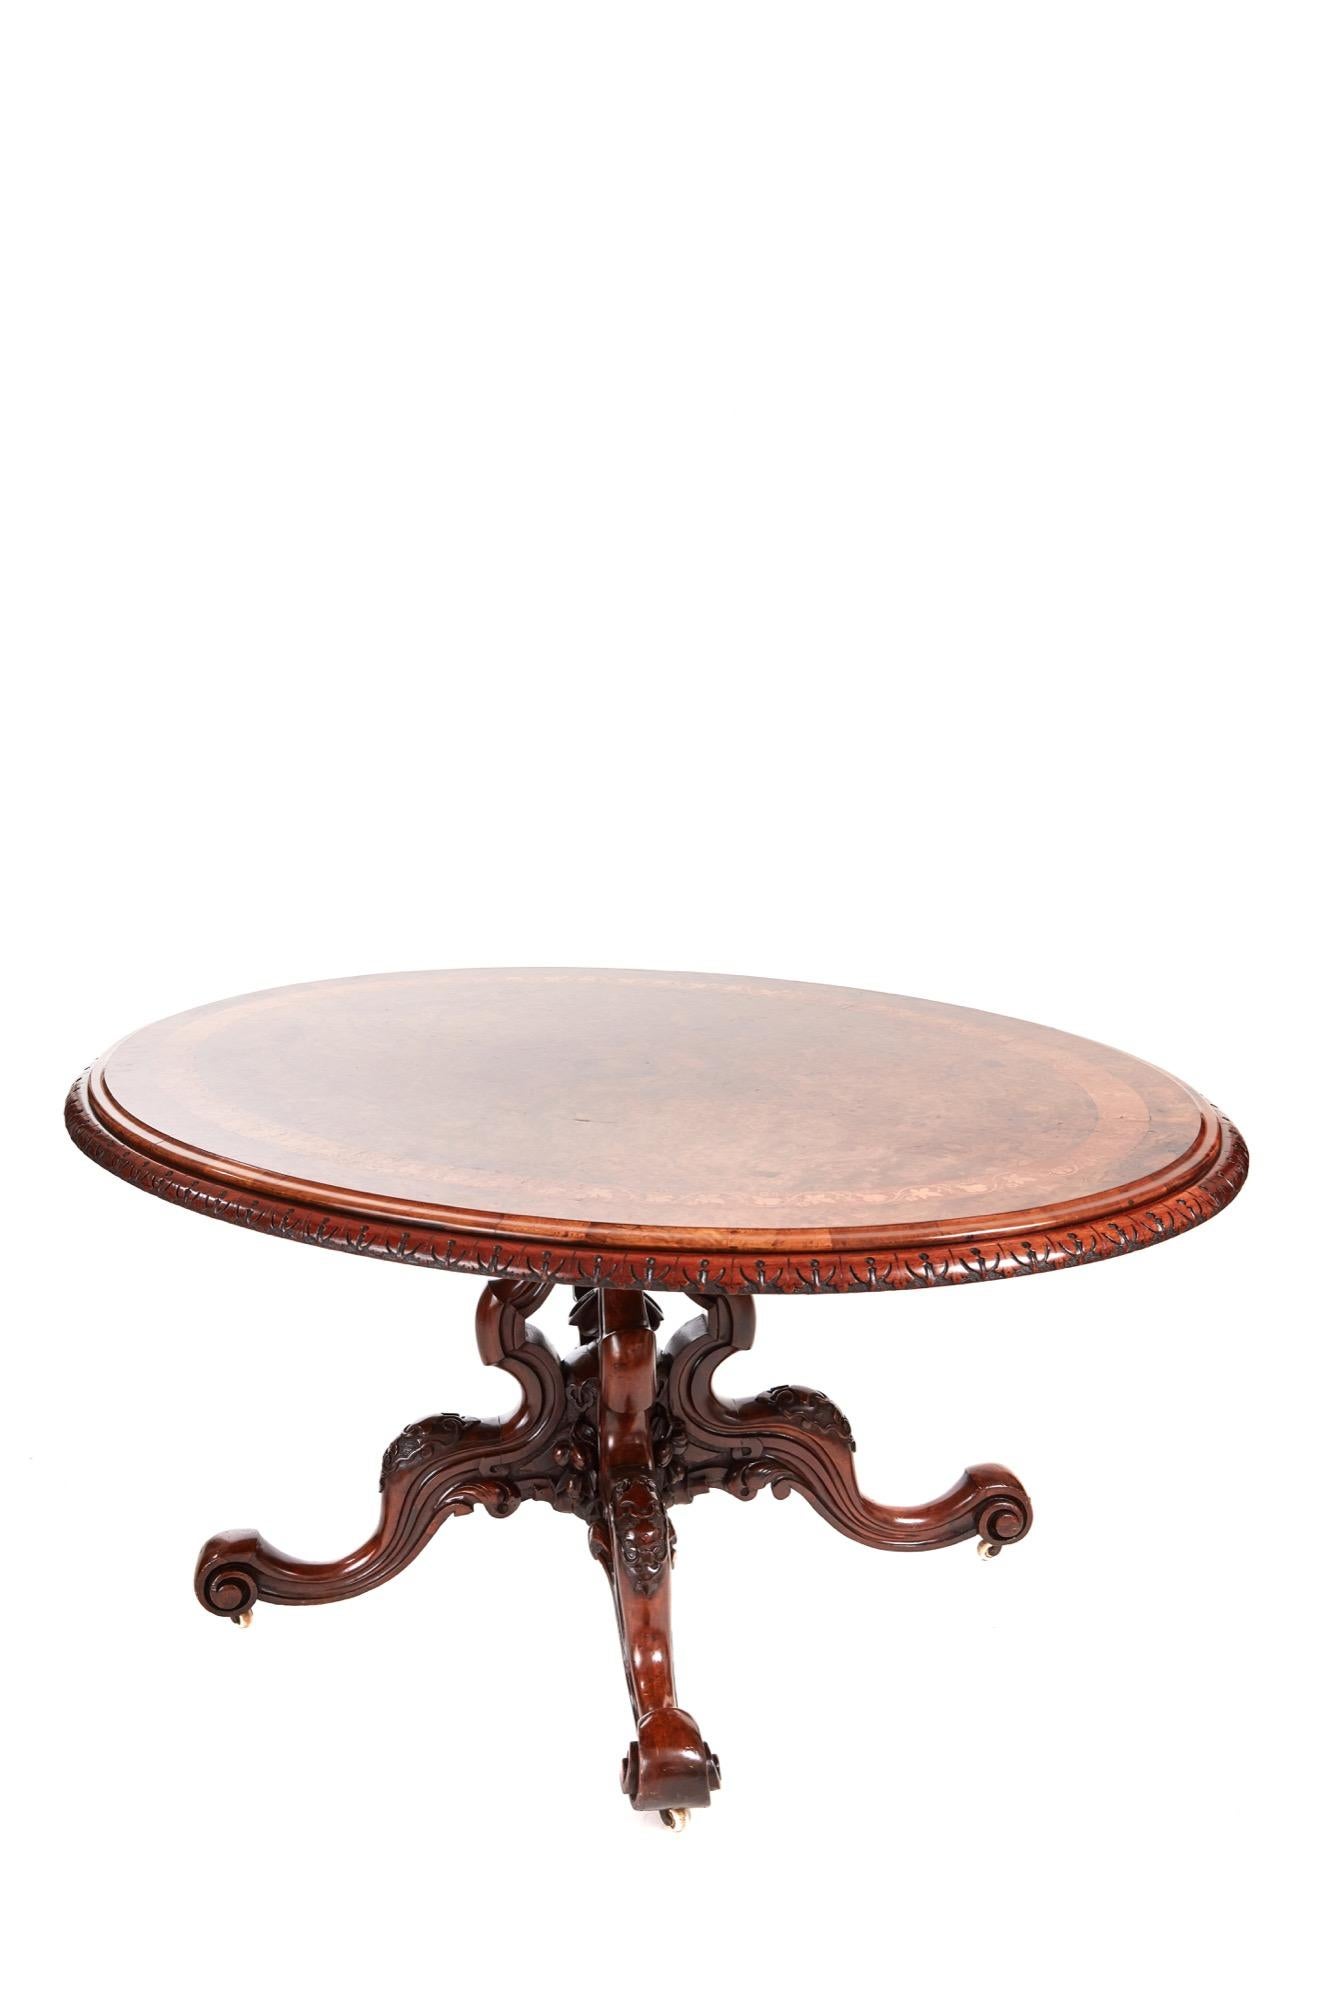 Fine quality early Victorian 19th century burr walnut inlaid centre table having a magnificent oval top beautifully and expertly inlaid with kingswood and satinwood marquetry with a banding thumb moulded edge. It stands on an exceptionally designed